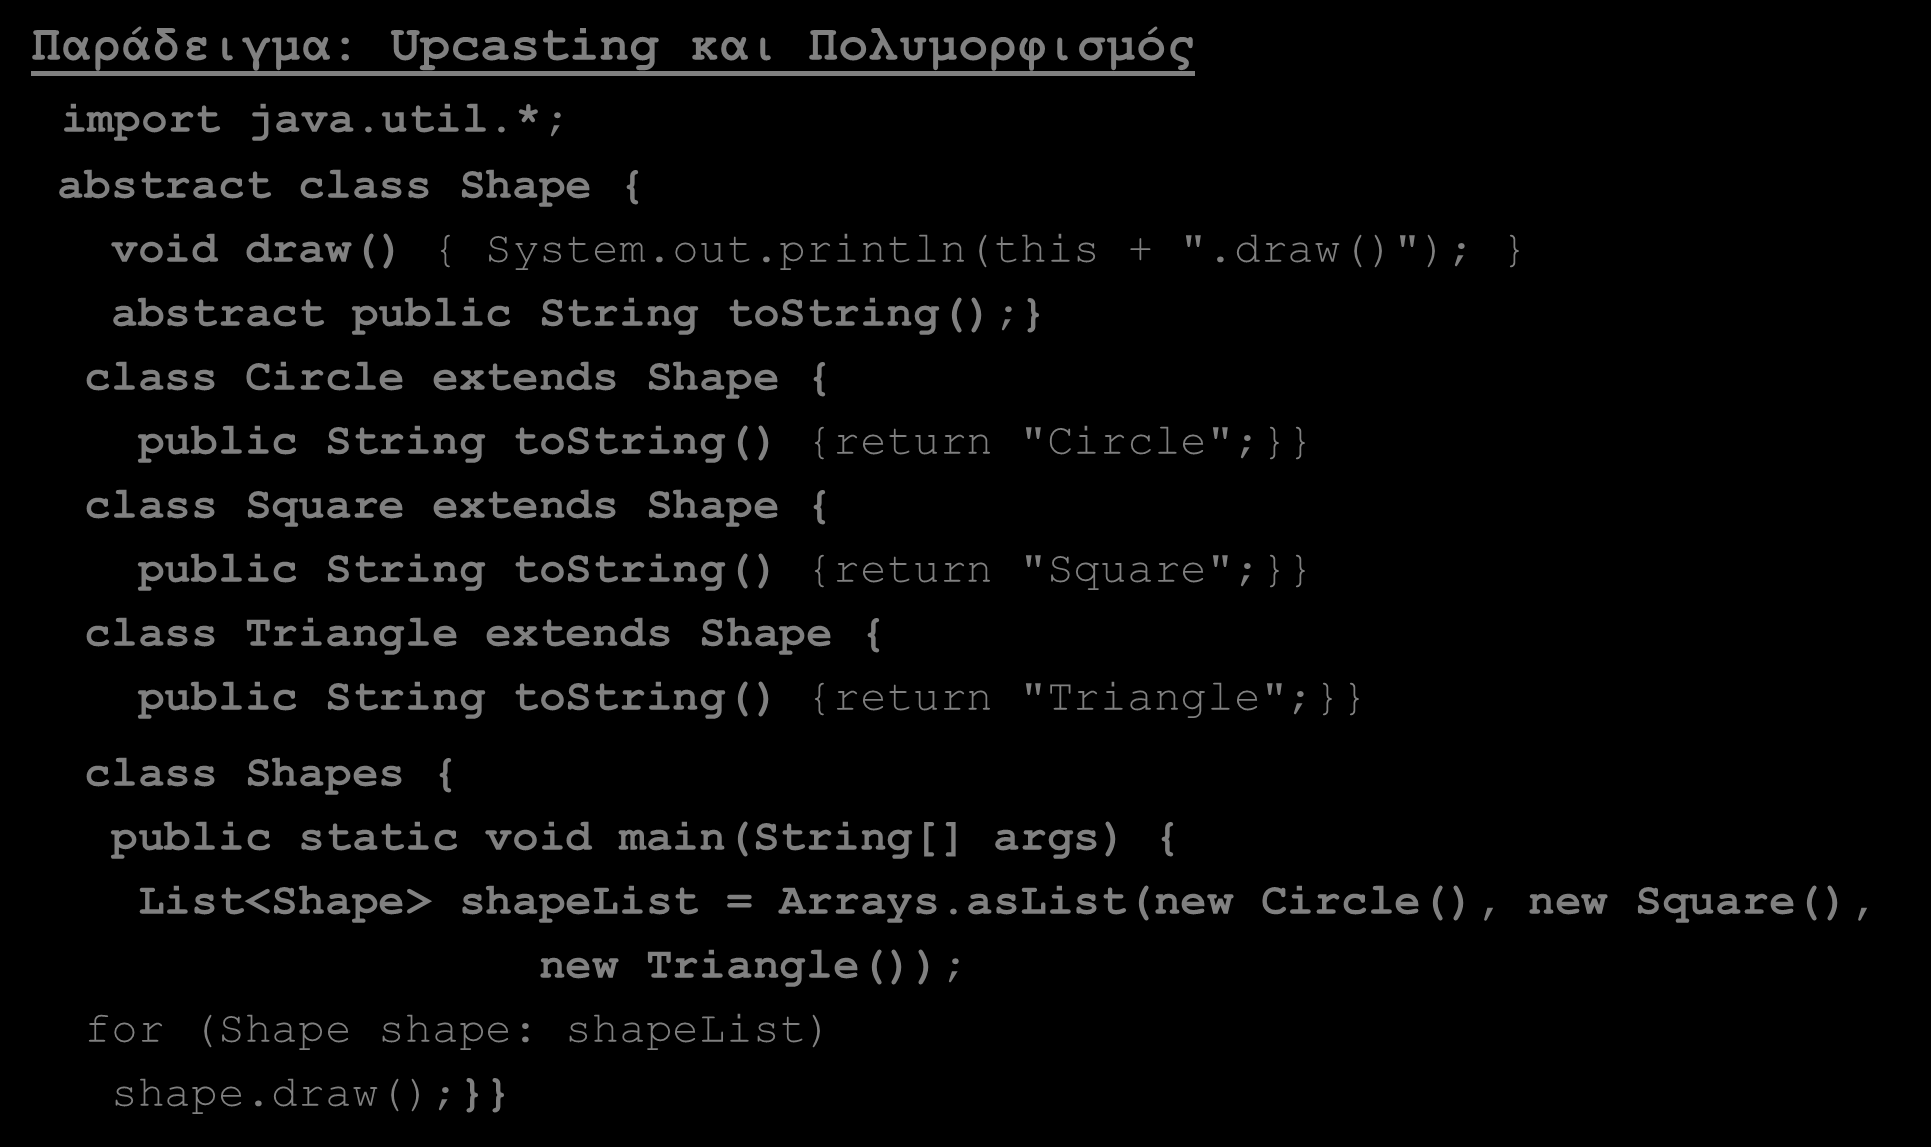 Upcasting Downcasting (5/9) Παράδειγμα: Upcasting και Πολυμορφισμός import java.util.*; abstract class Shape { void draw() { System.out.println(this + ".